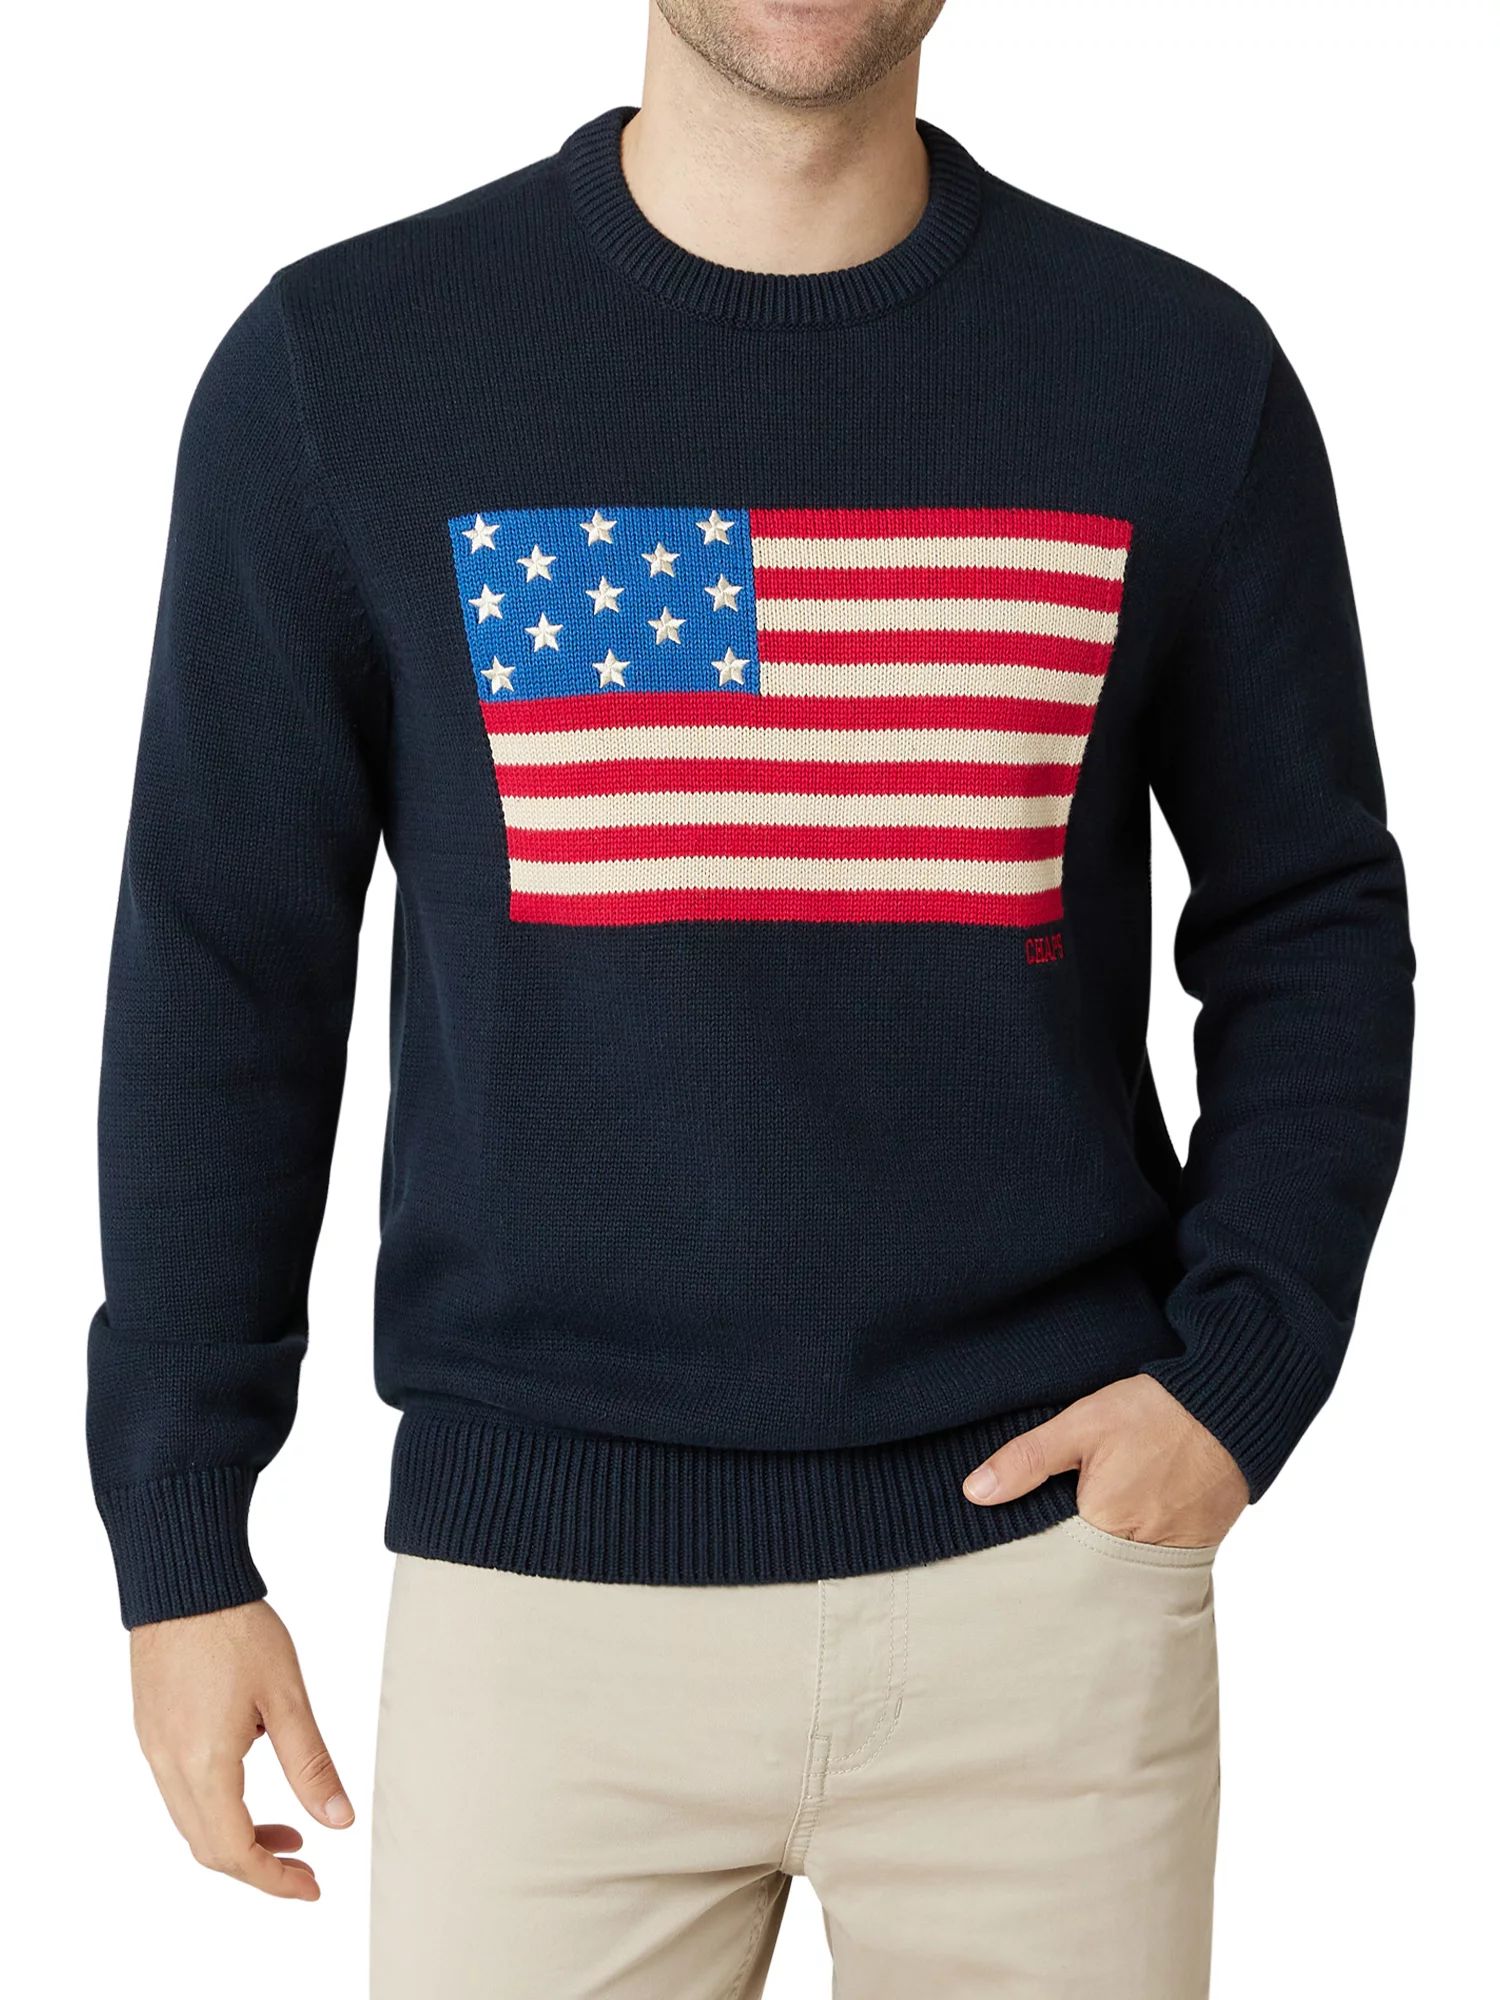 Chaps Men's Cotton Iconic Flag Sweater-Sizes XS up to 4XB | Walmart (US)